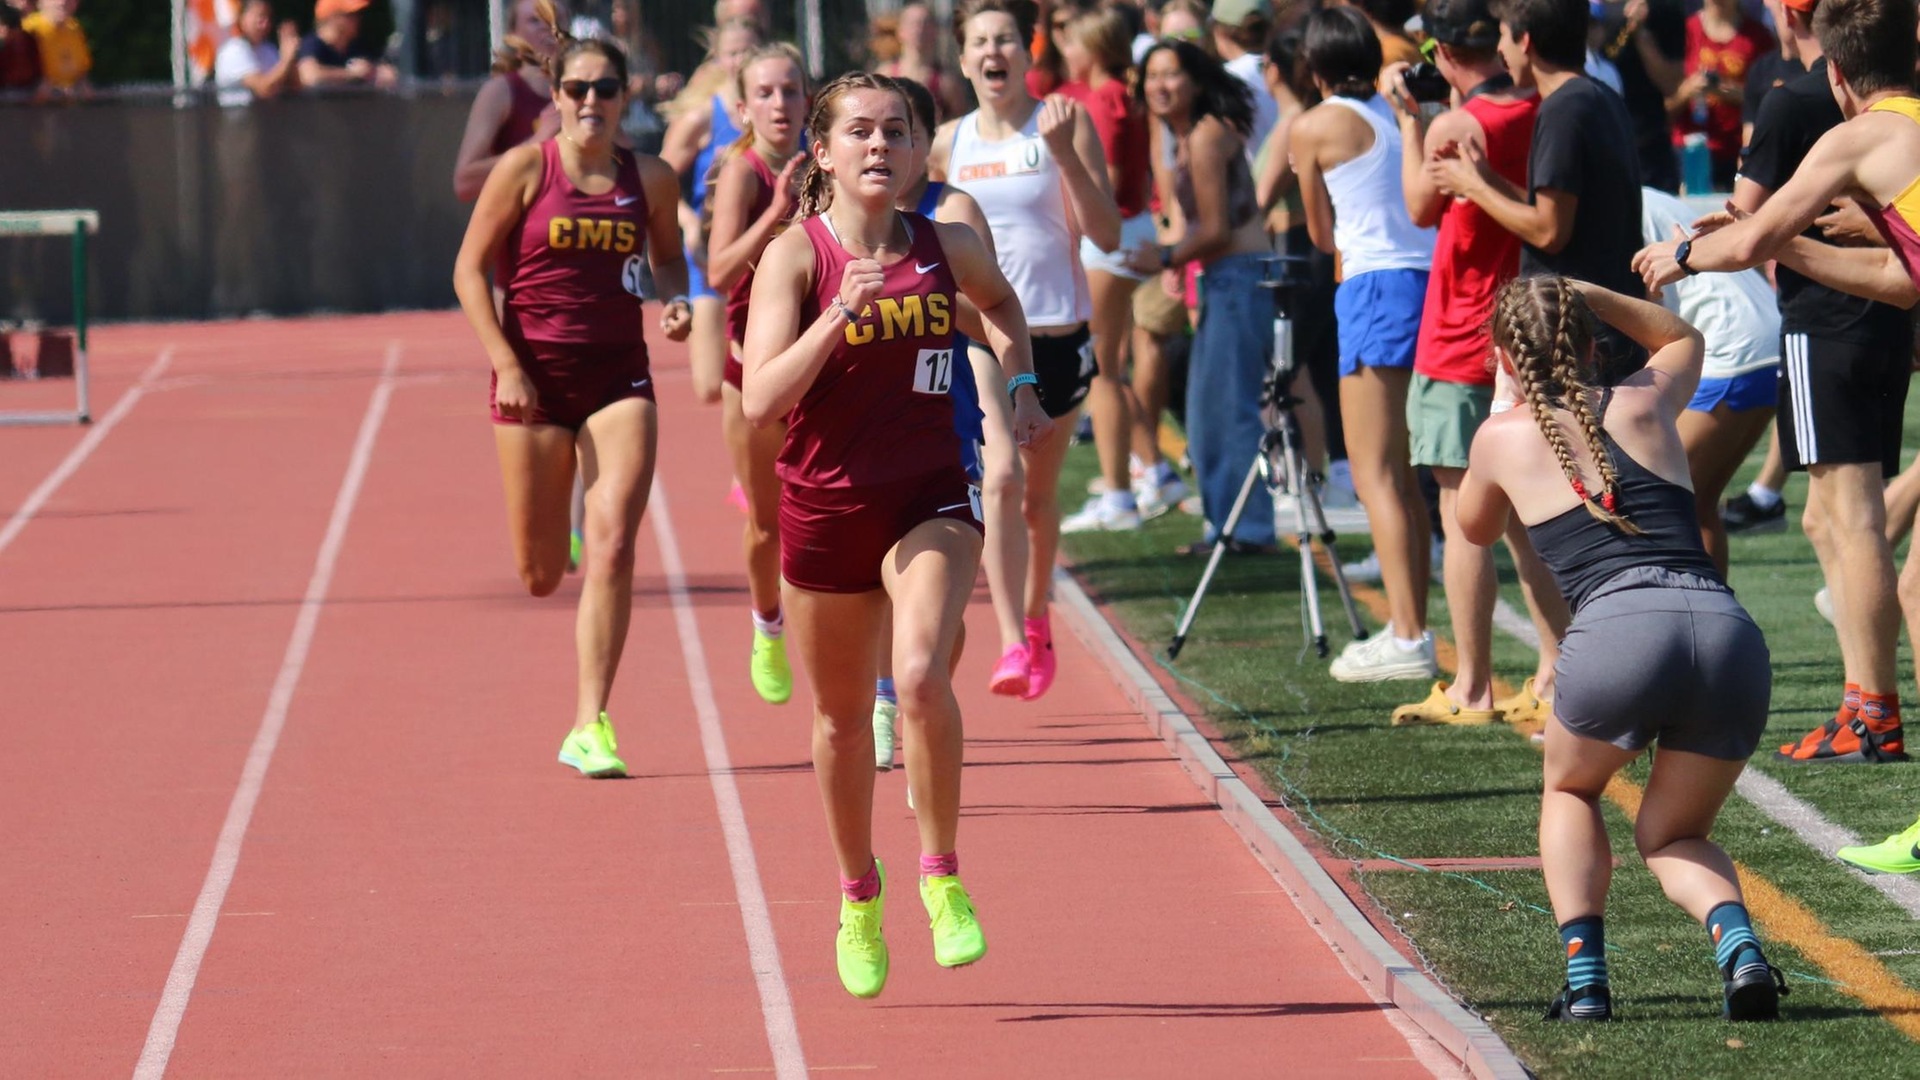 Riley Capuano on her way to winning the SCIAC 1500 meter title